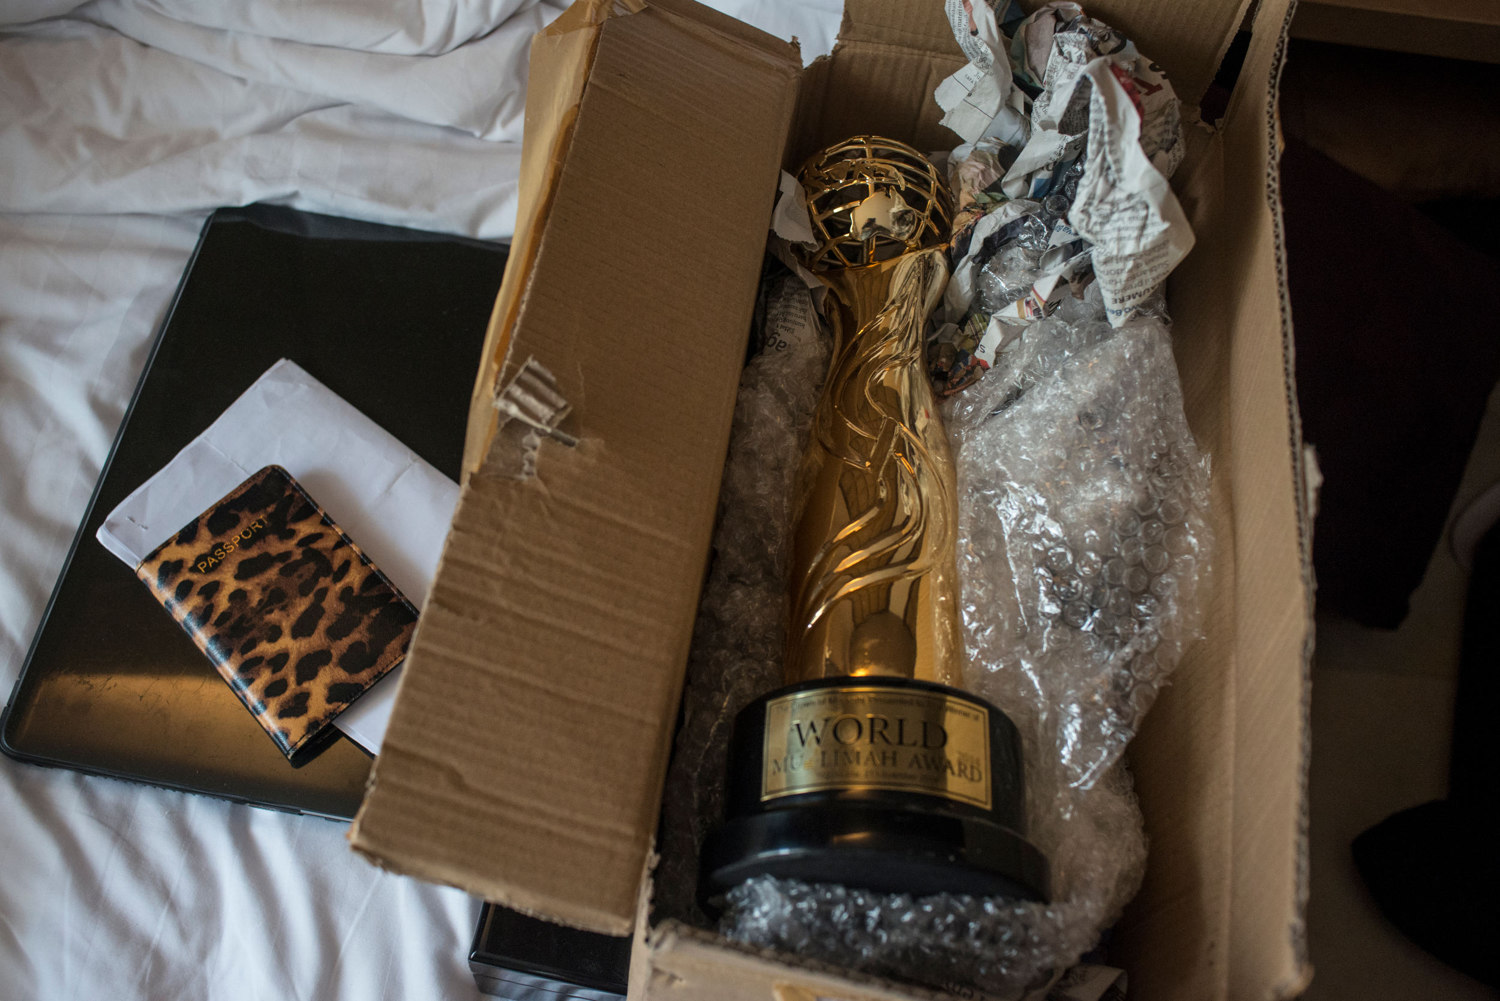  The Miss Muslimah 2014 trophy sits on Fatma Ben Guefrache of Tunisia's bed as she packs to leave Indonesia. 
 